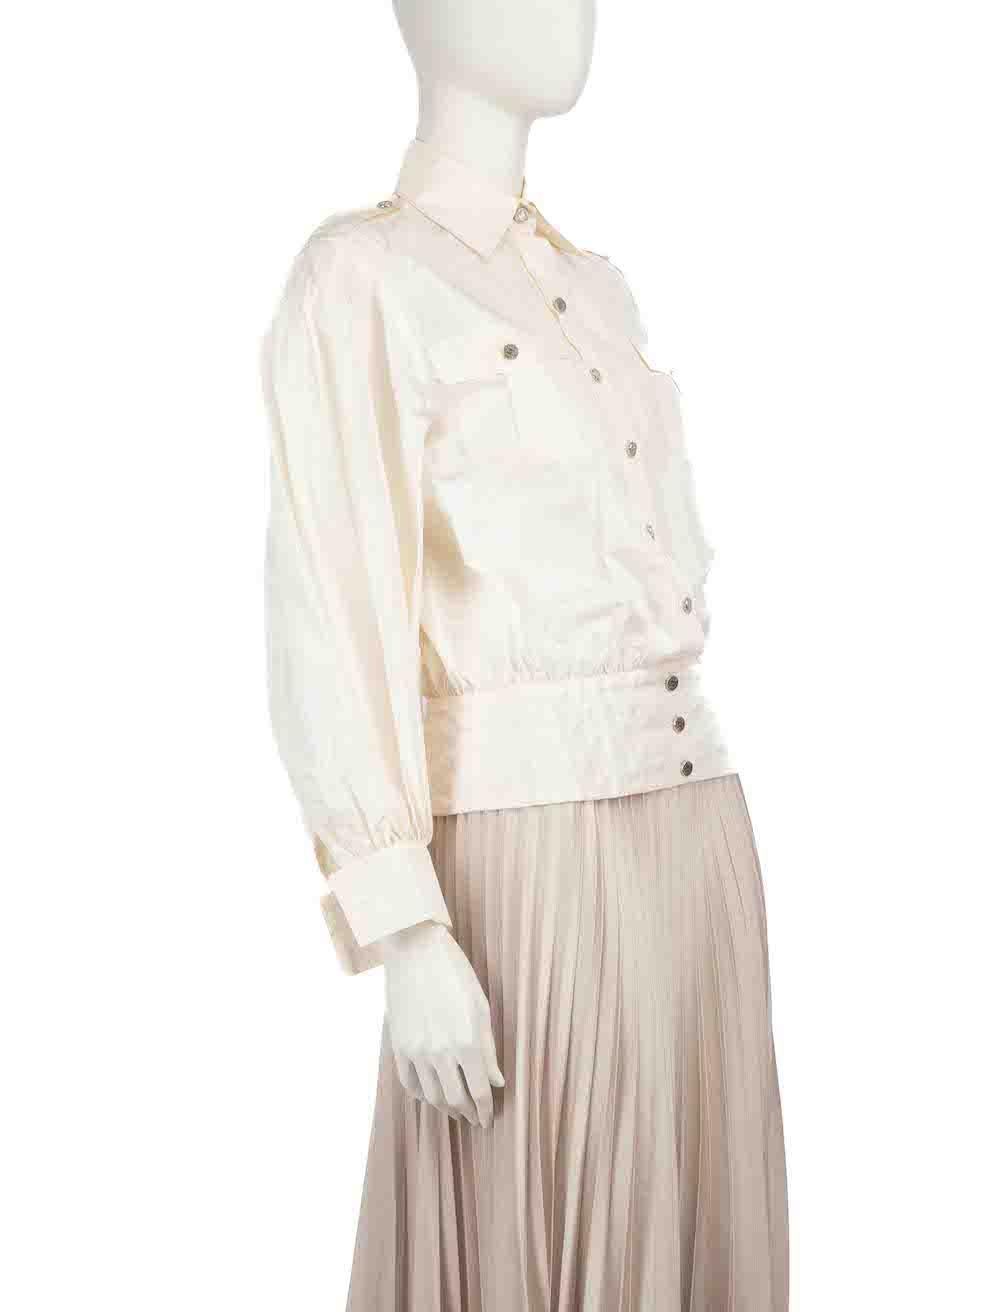 CONDITION is Very good. Hardly any visible wear to the Jacket is evident on this used Chanel designer resale item.
 
 
 
 Details
 
 
 Cream
 
 Silk
 
 Jacket
 
 Long sleeves
 
 Button up fastening
 
 CC Logo buttons
 
 Sheer
 
 2x Front pockets
 
